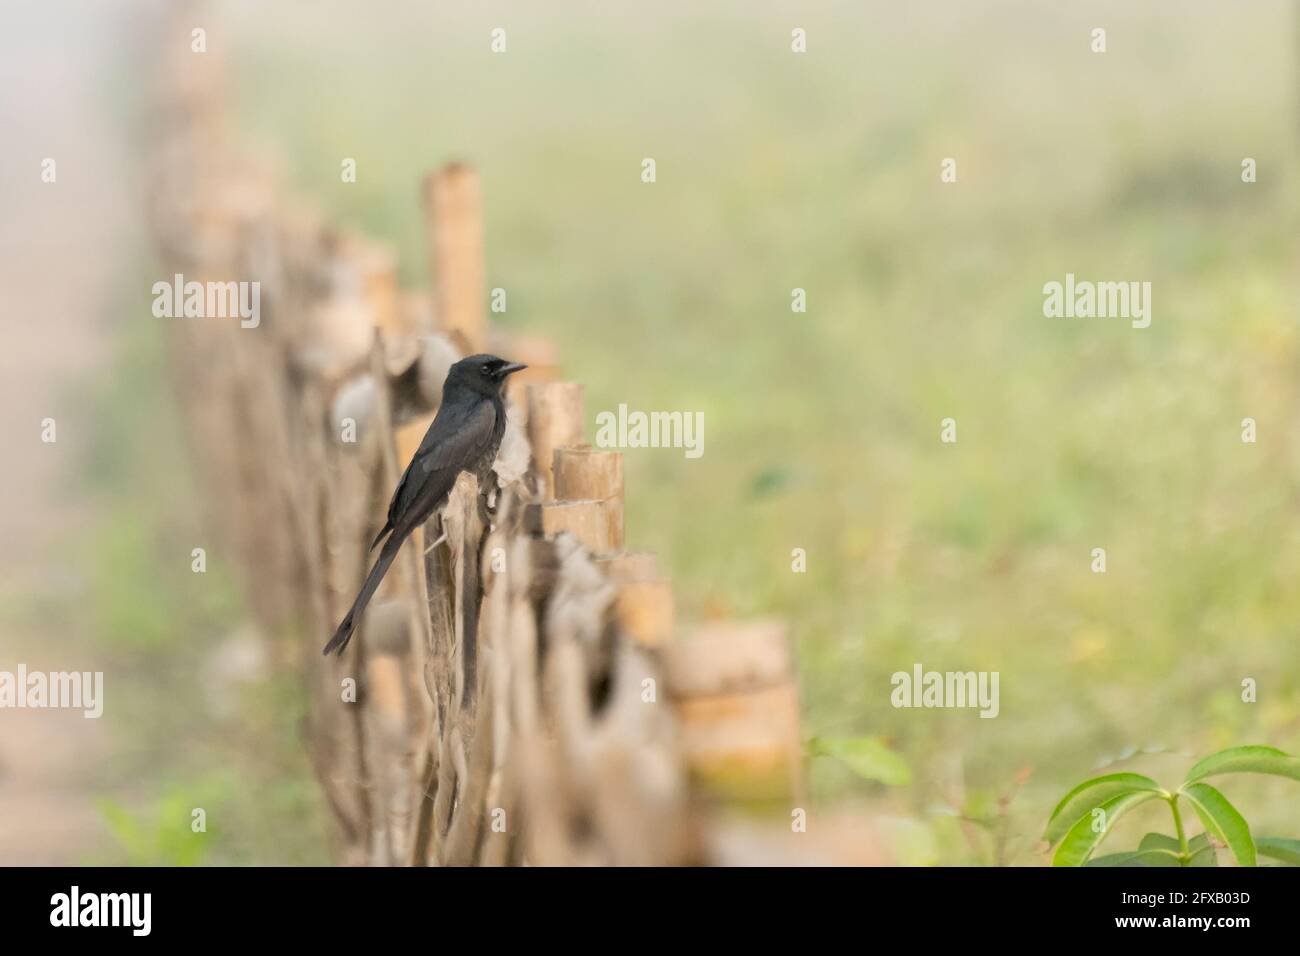 Little Pied cormorant (Microcarbo melanoleucos), bird sitting on fence - image with copyspace Stock Photo